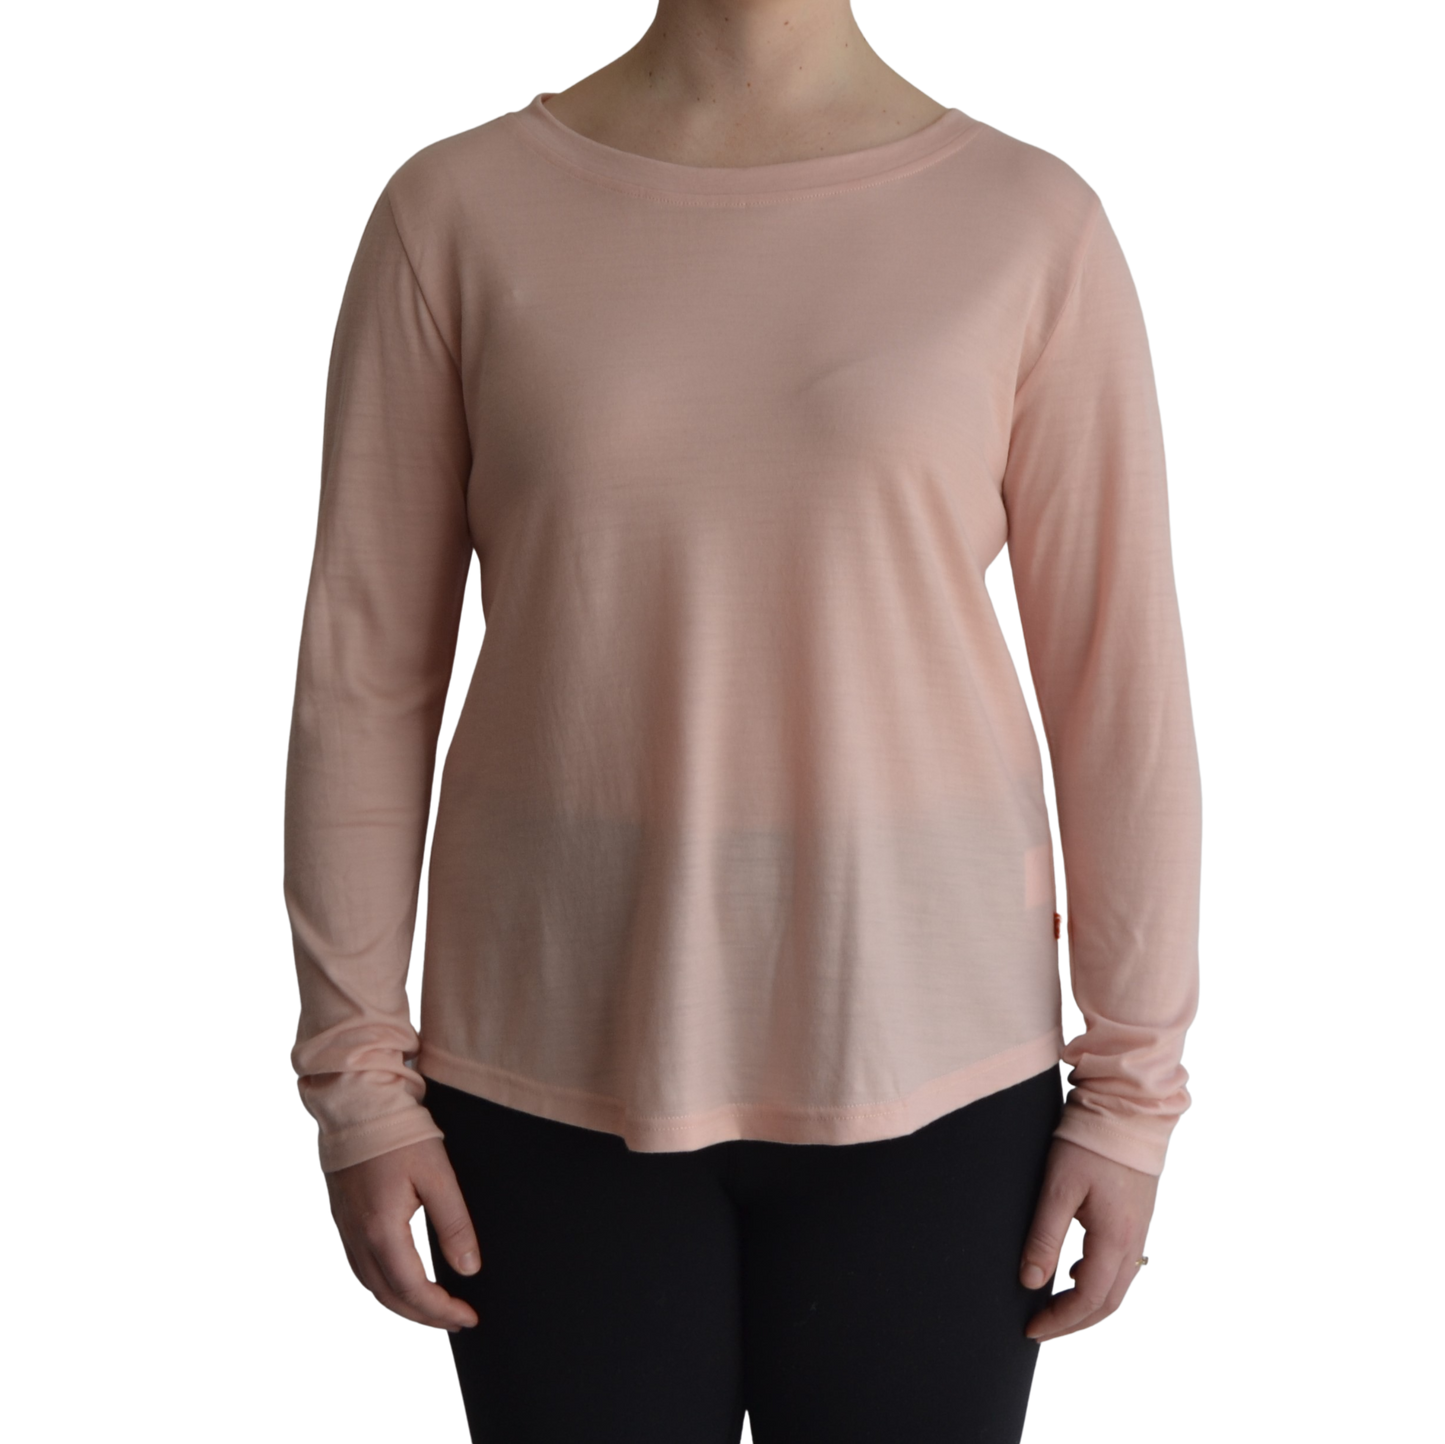 Links long sleeve merino top in petal light pink colour, model faces forward showing the front of the top with scooped neck and hemline.. 